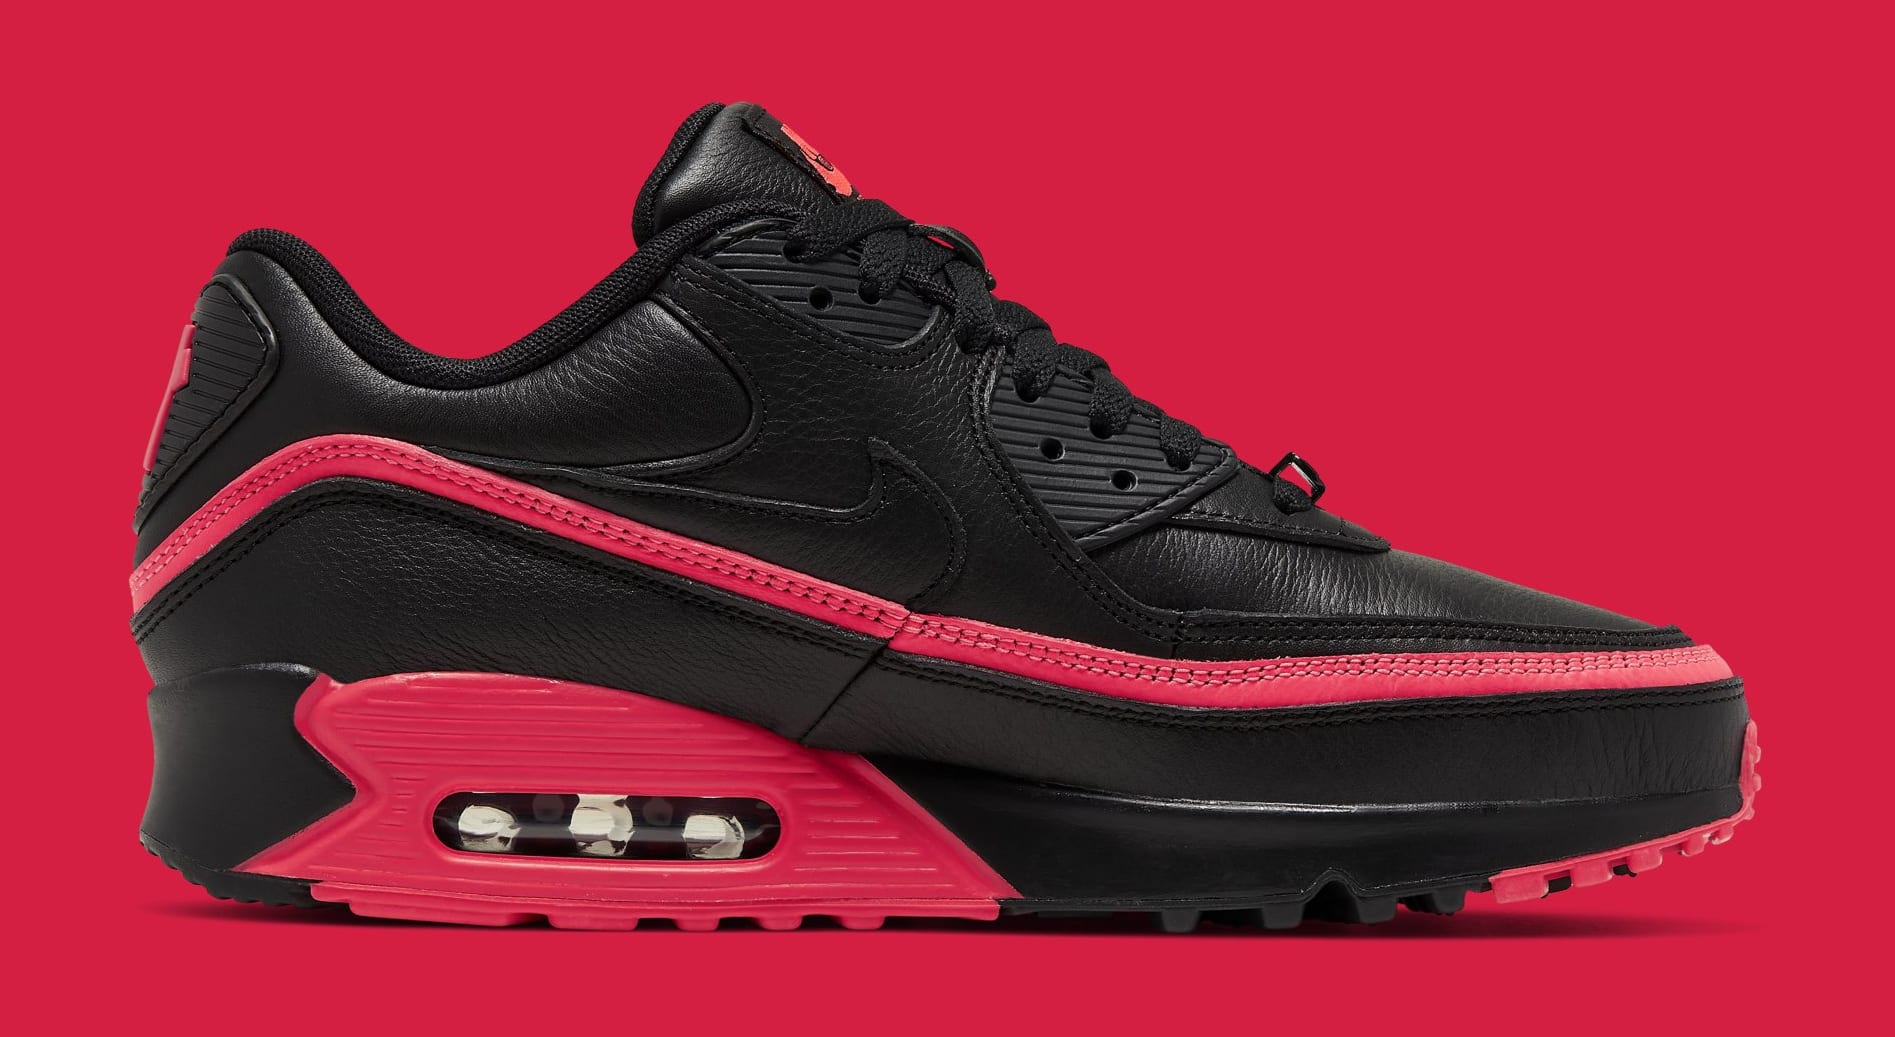 undefeated-nike-air-max-90-black-solar-red-cj7197-003-medial